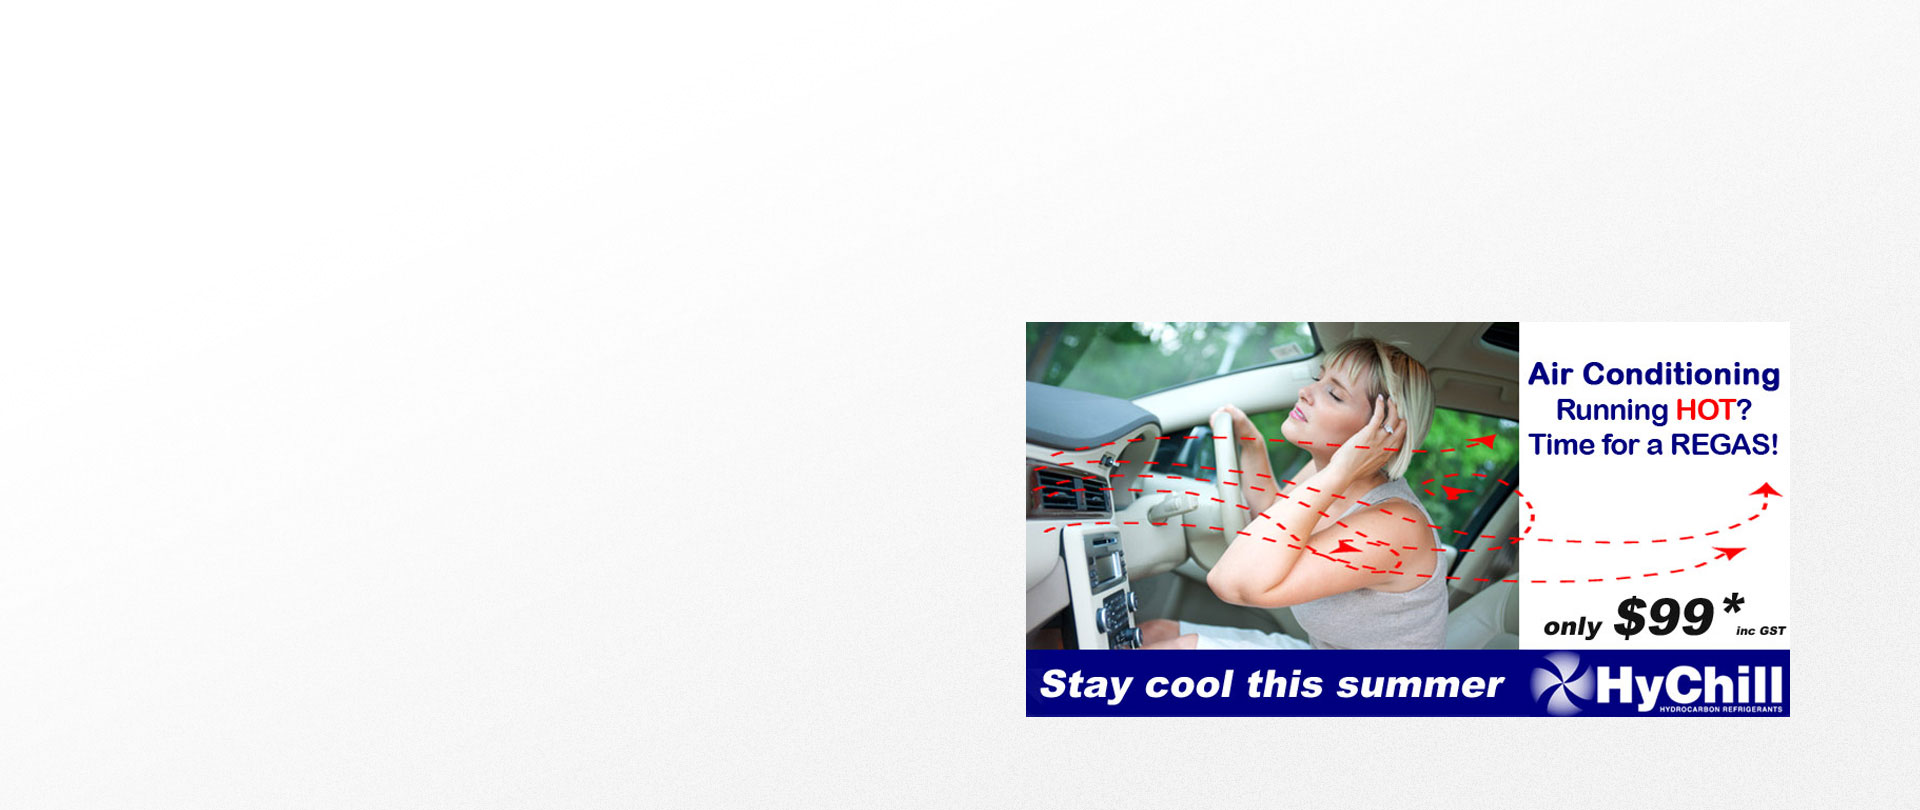 REGAS Air Conditioner in your vehicle and stay COOL this summer!